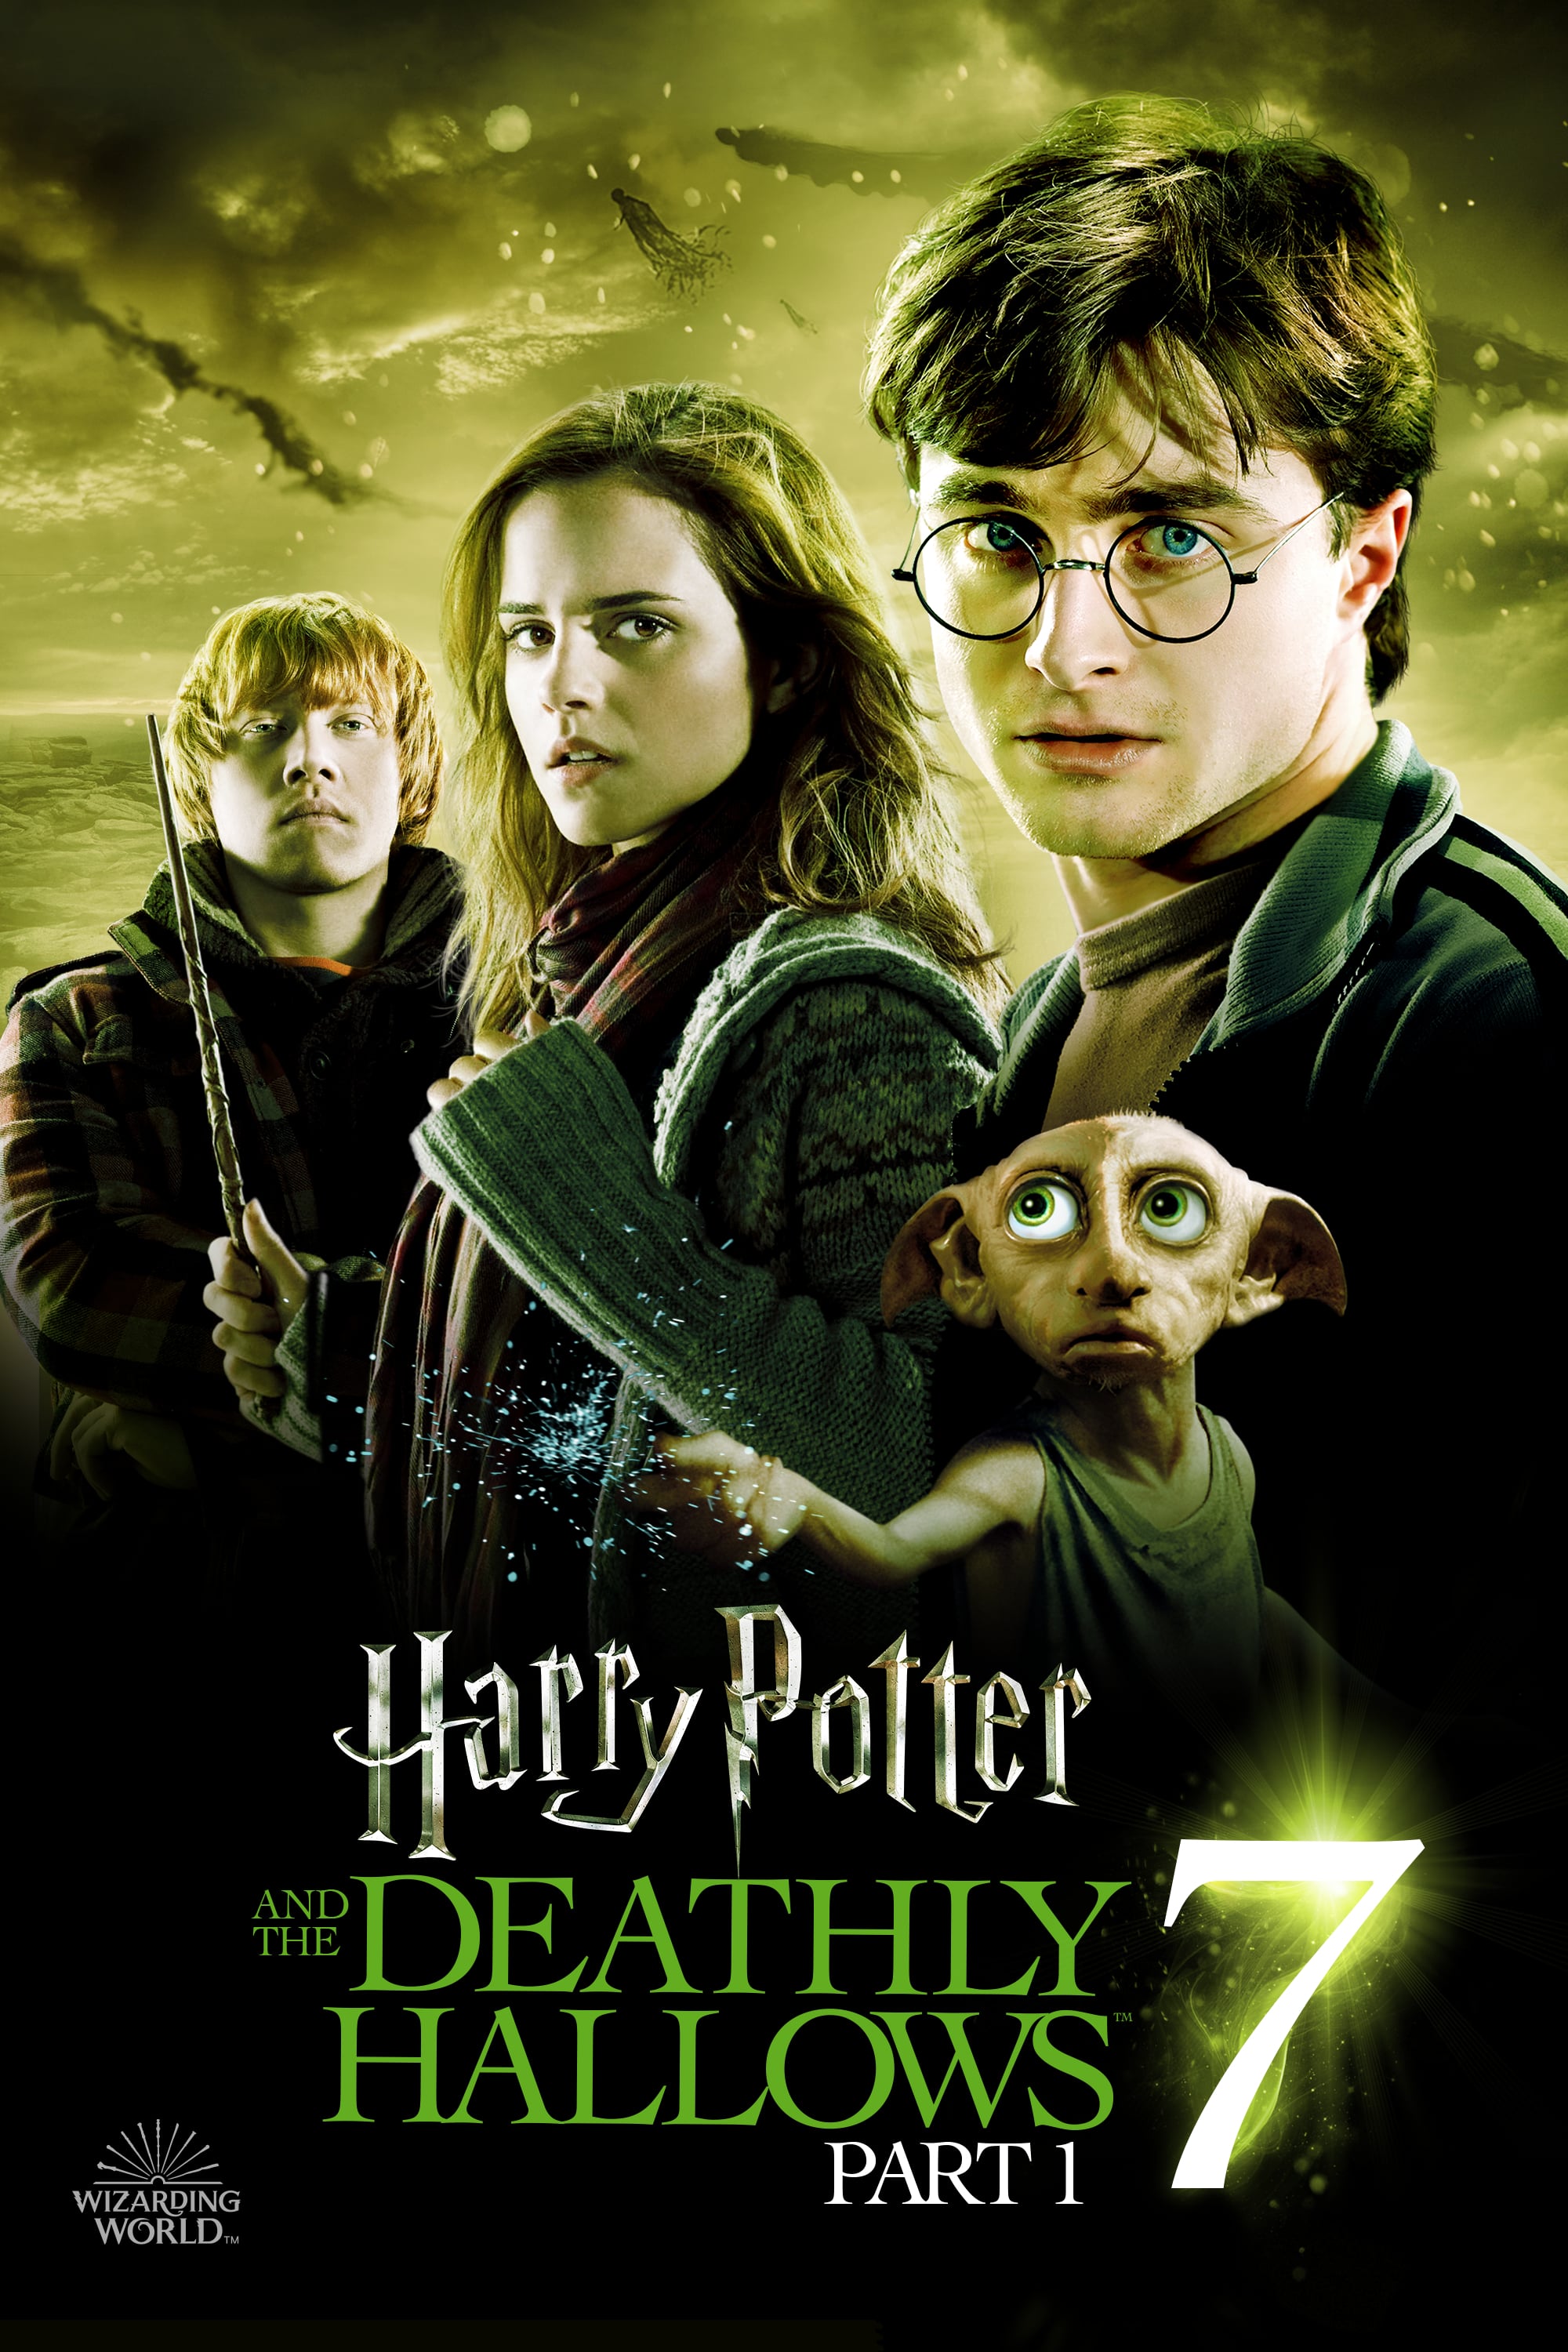 Harry Potter And The Deathly Hallows Part 1 Movie